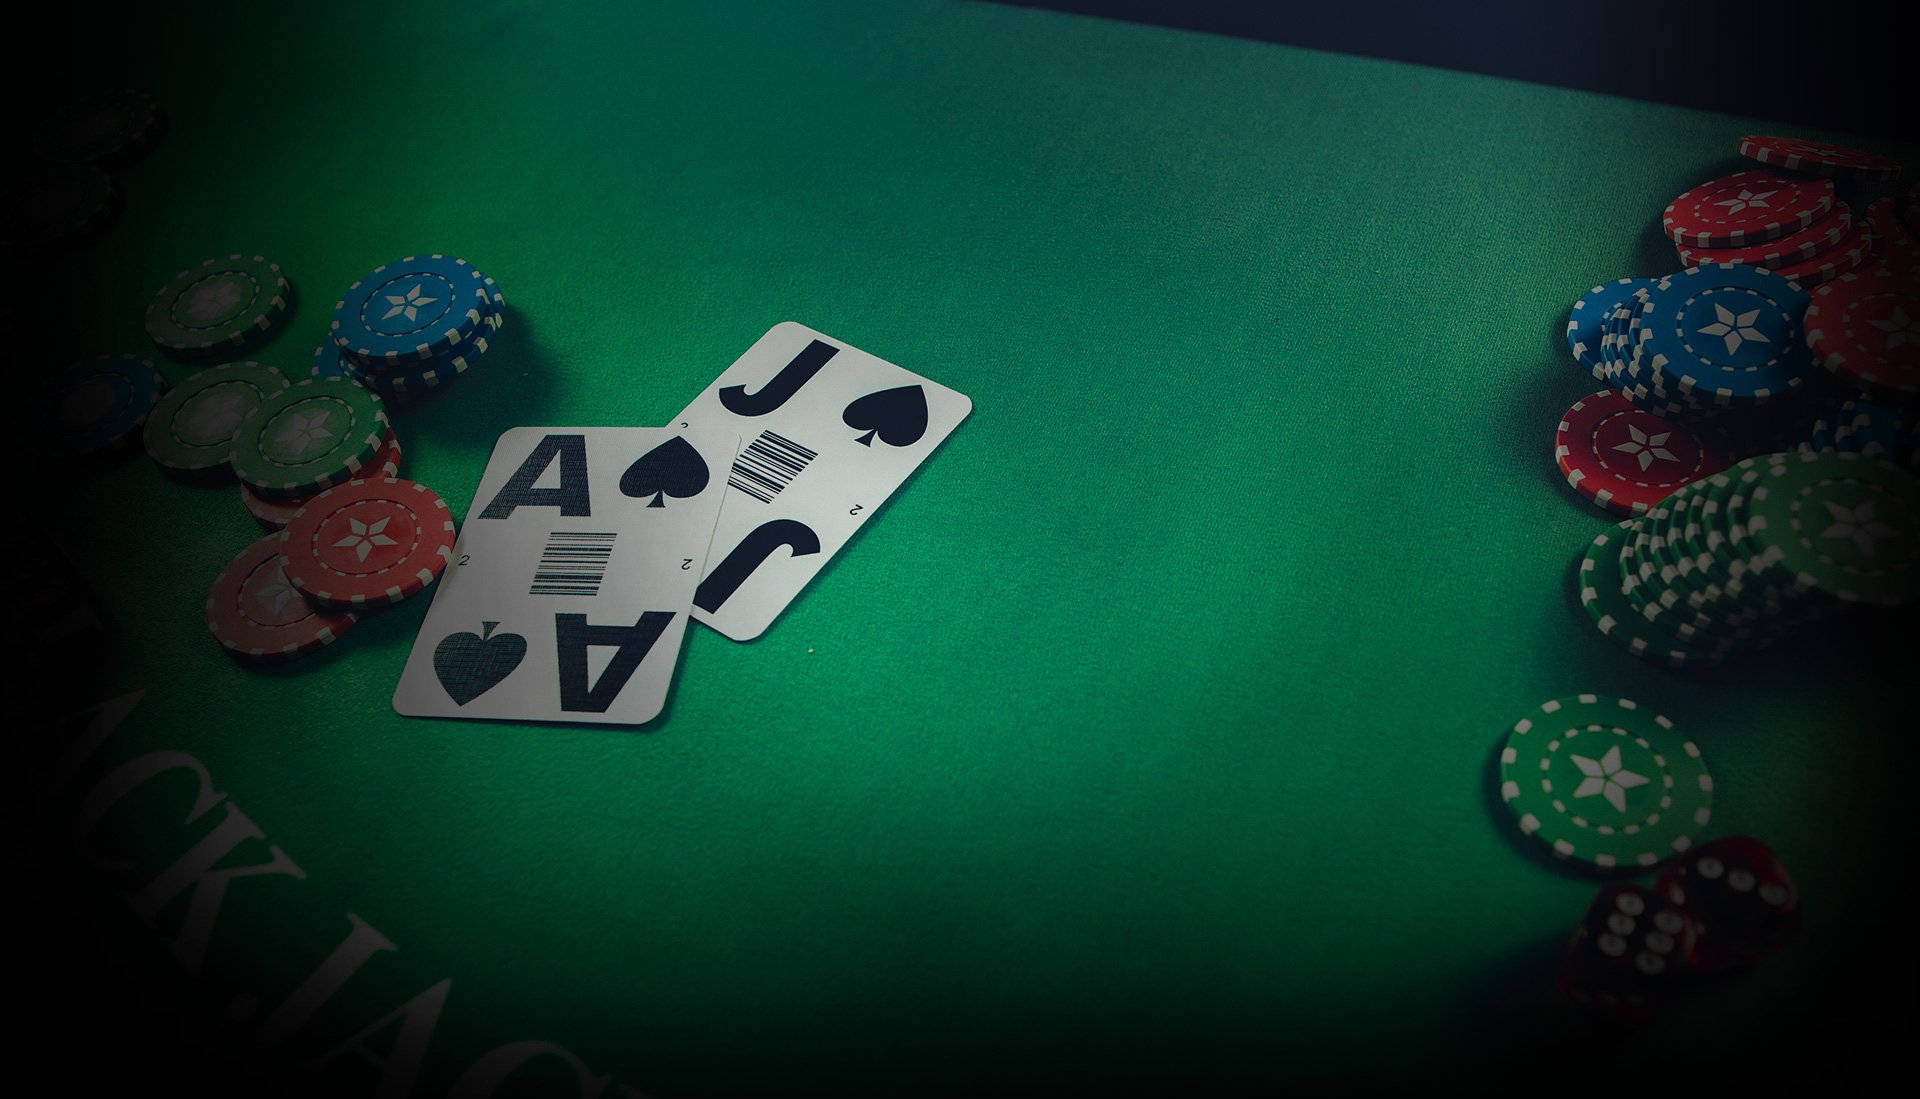 Two Spades Card Green Baccarat Table Chips Wallpaper